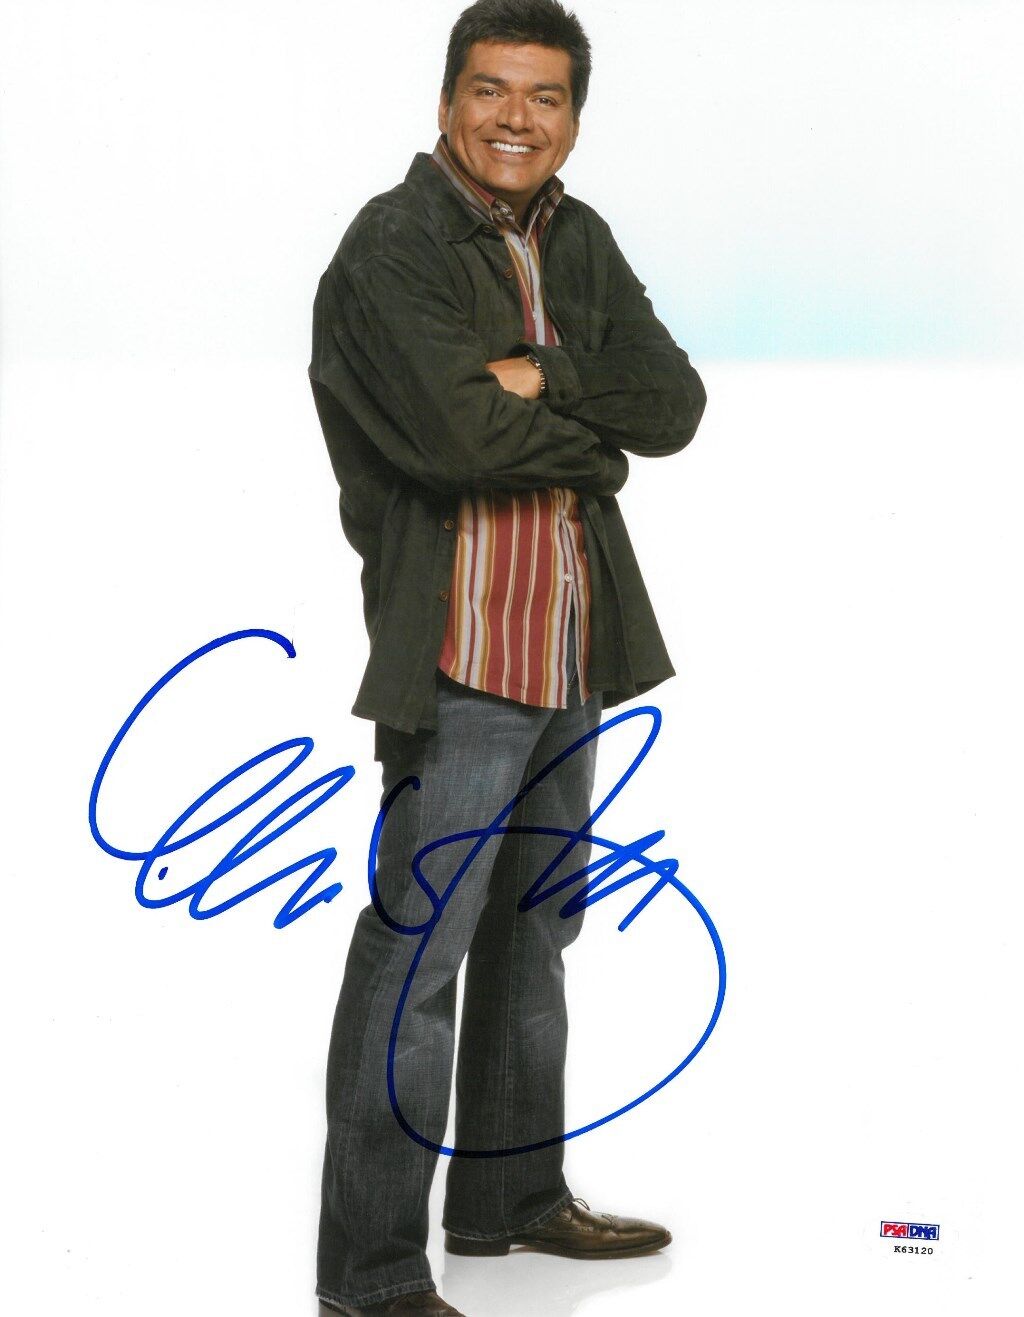 George Lopez Signed Authentic Autographed 11x14 Photo Poster painting PSA/DNA #K63120